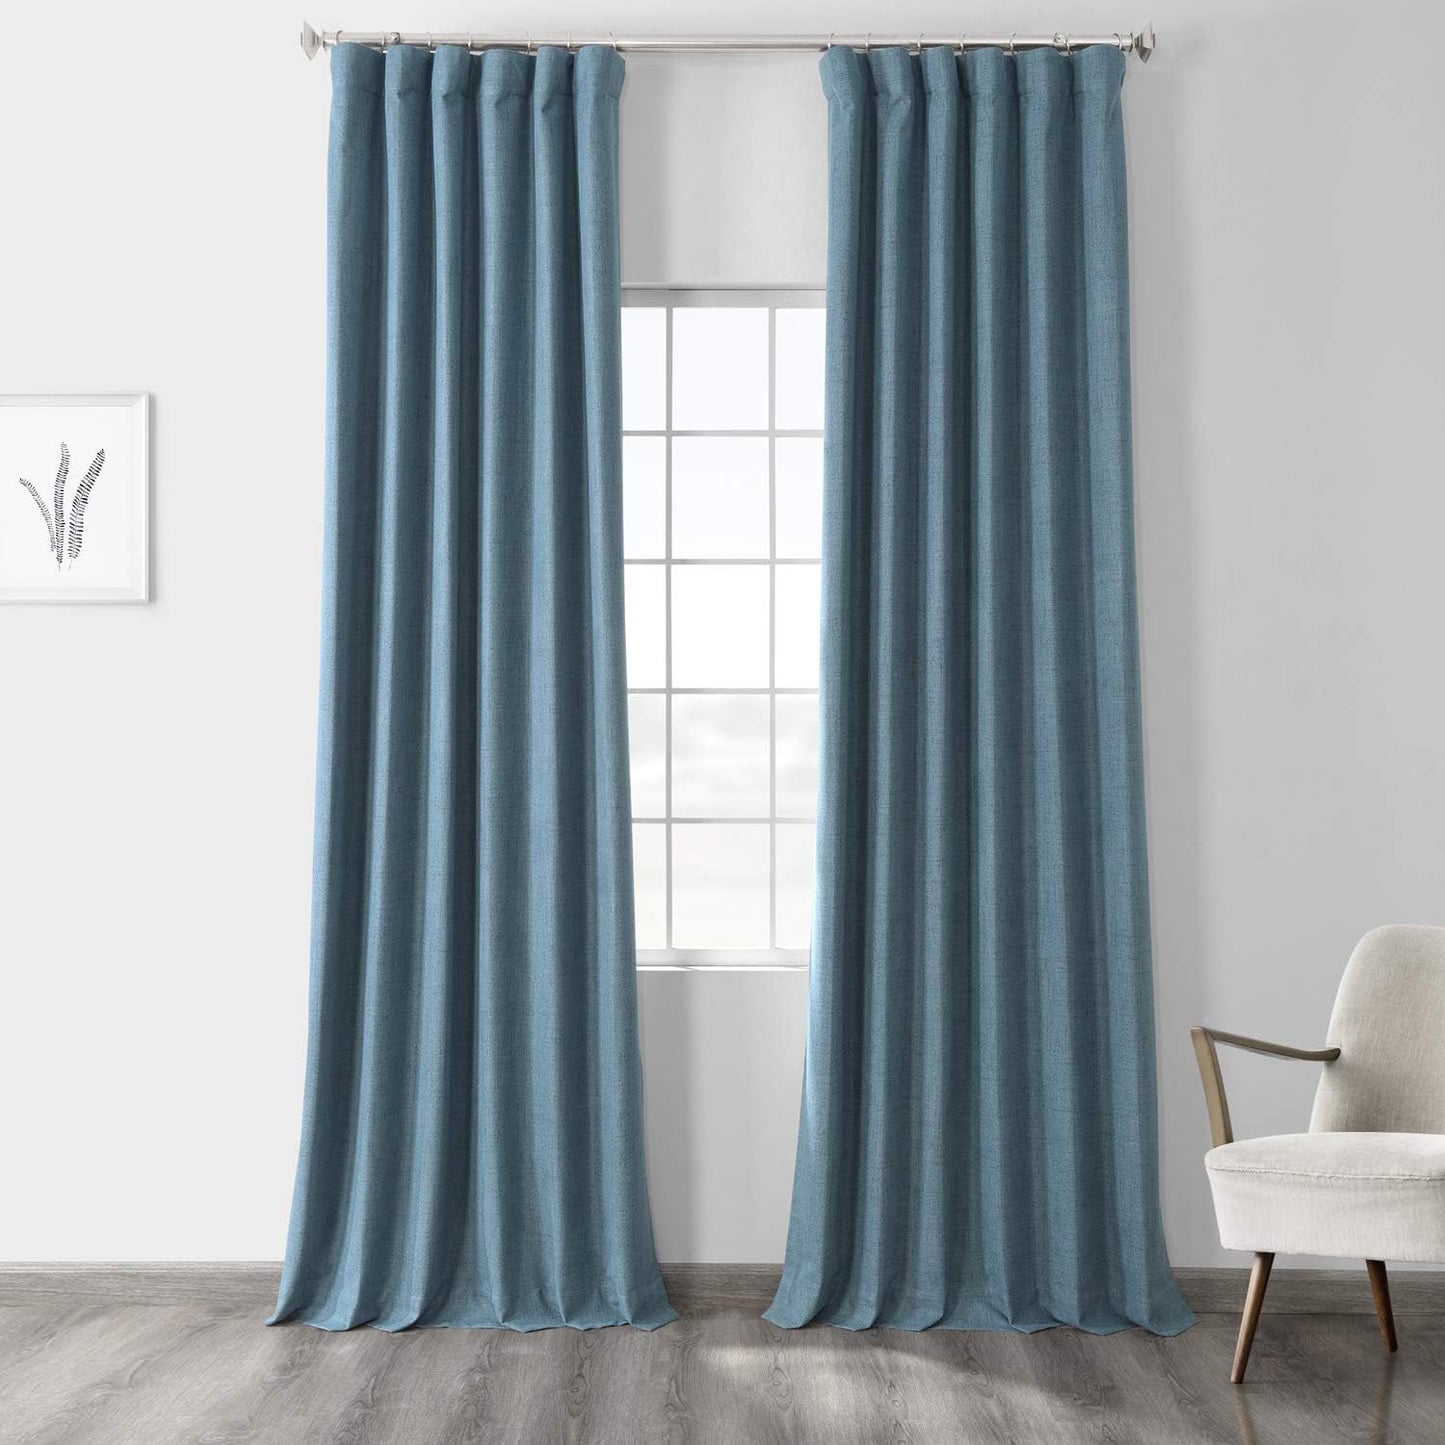 HPD Half Price Drapes Vintage Blackout Curtains for Bedroom - 96 Inches Long Thermal Cross Linen Weave Full Light Blocking 1 Panel Blackout Curtain, (50W X 96L), Millennial Grey  Exclusive Fabrics & Furnishings Ovation Blue 50W X 108L 